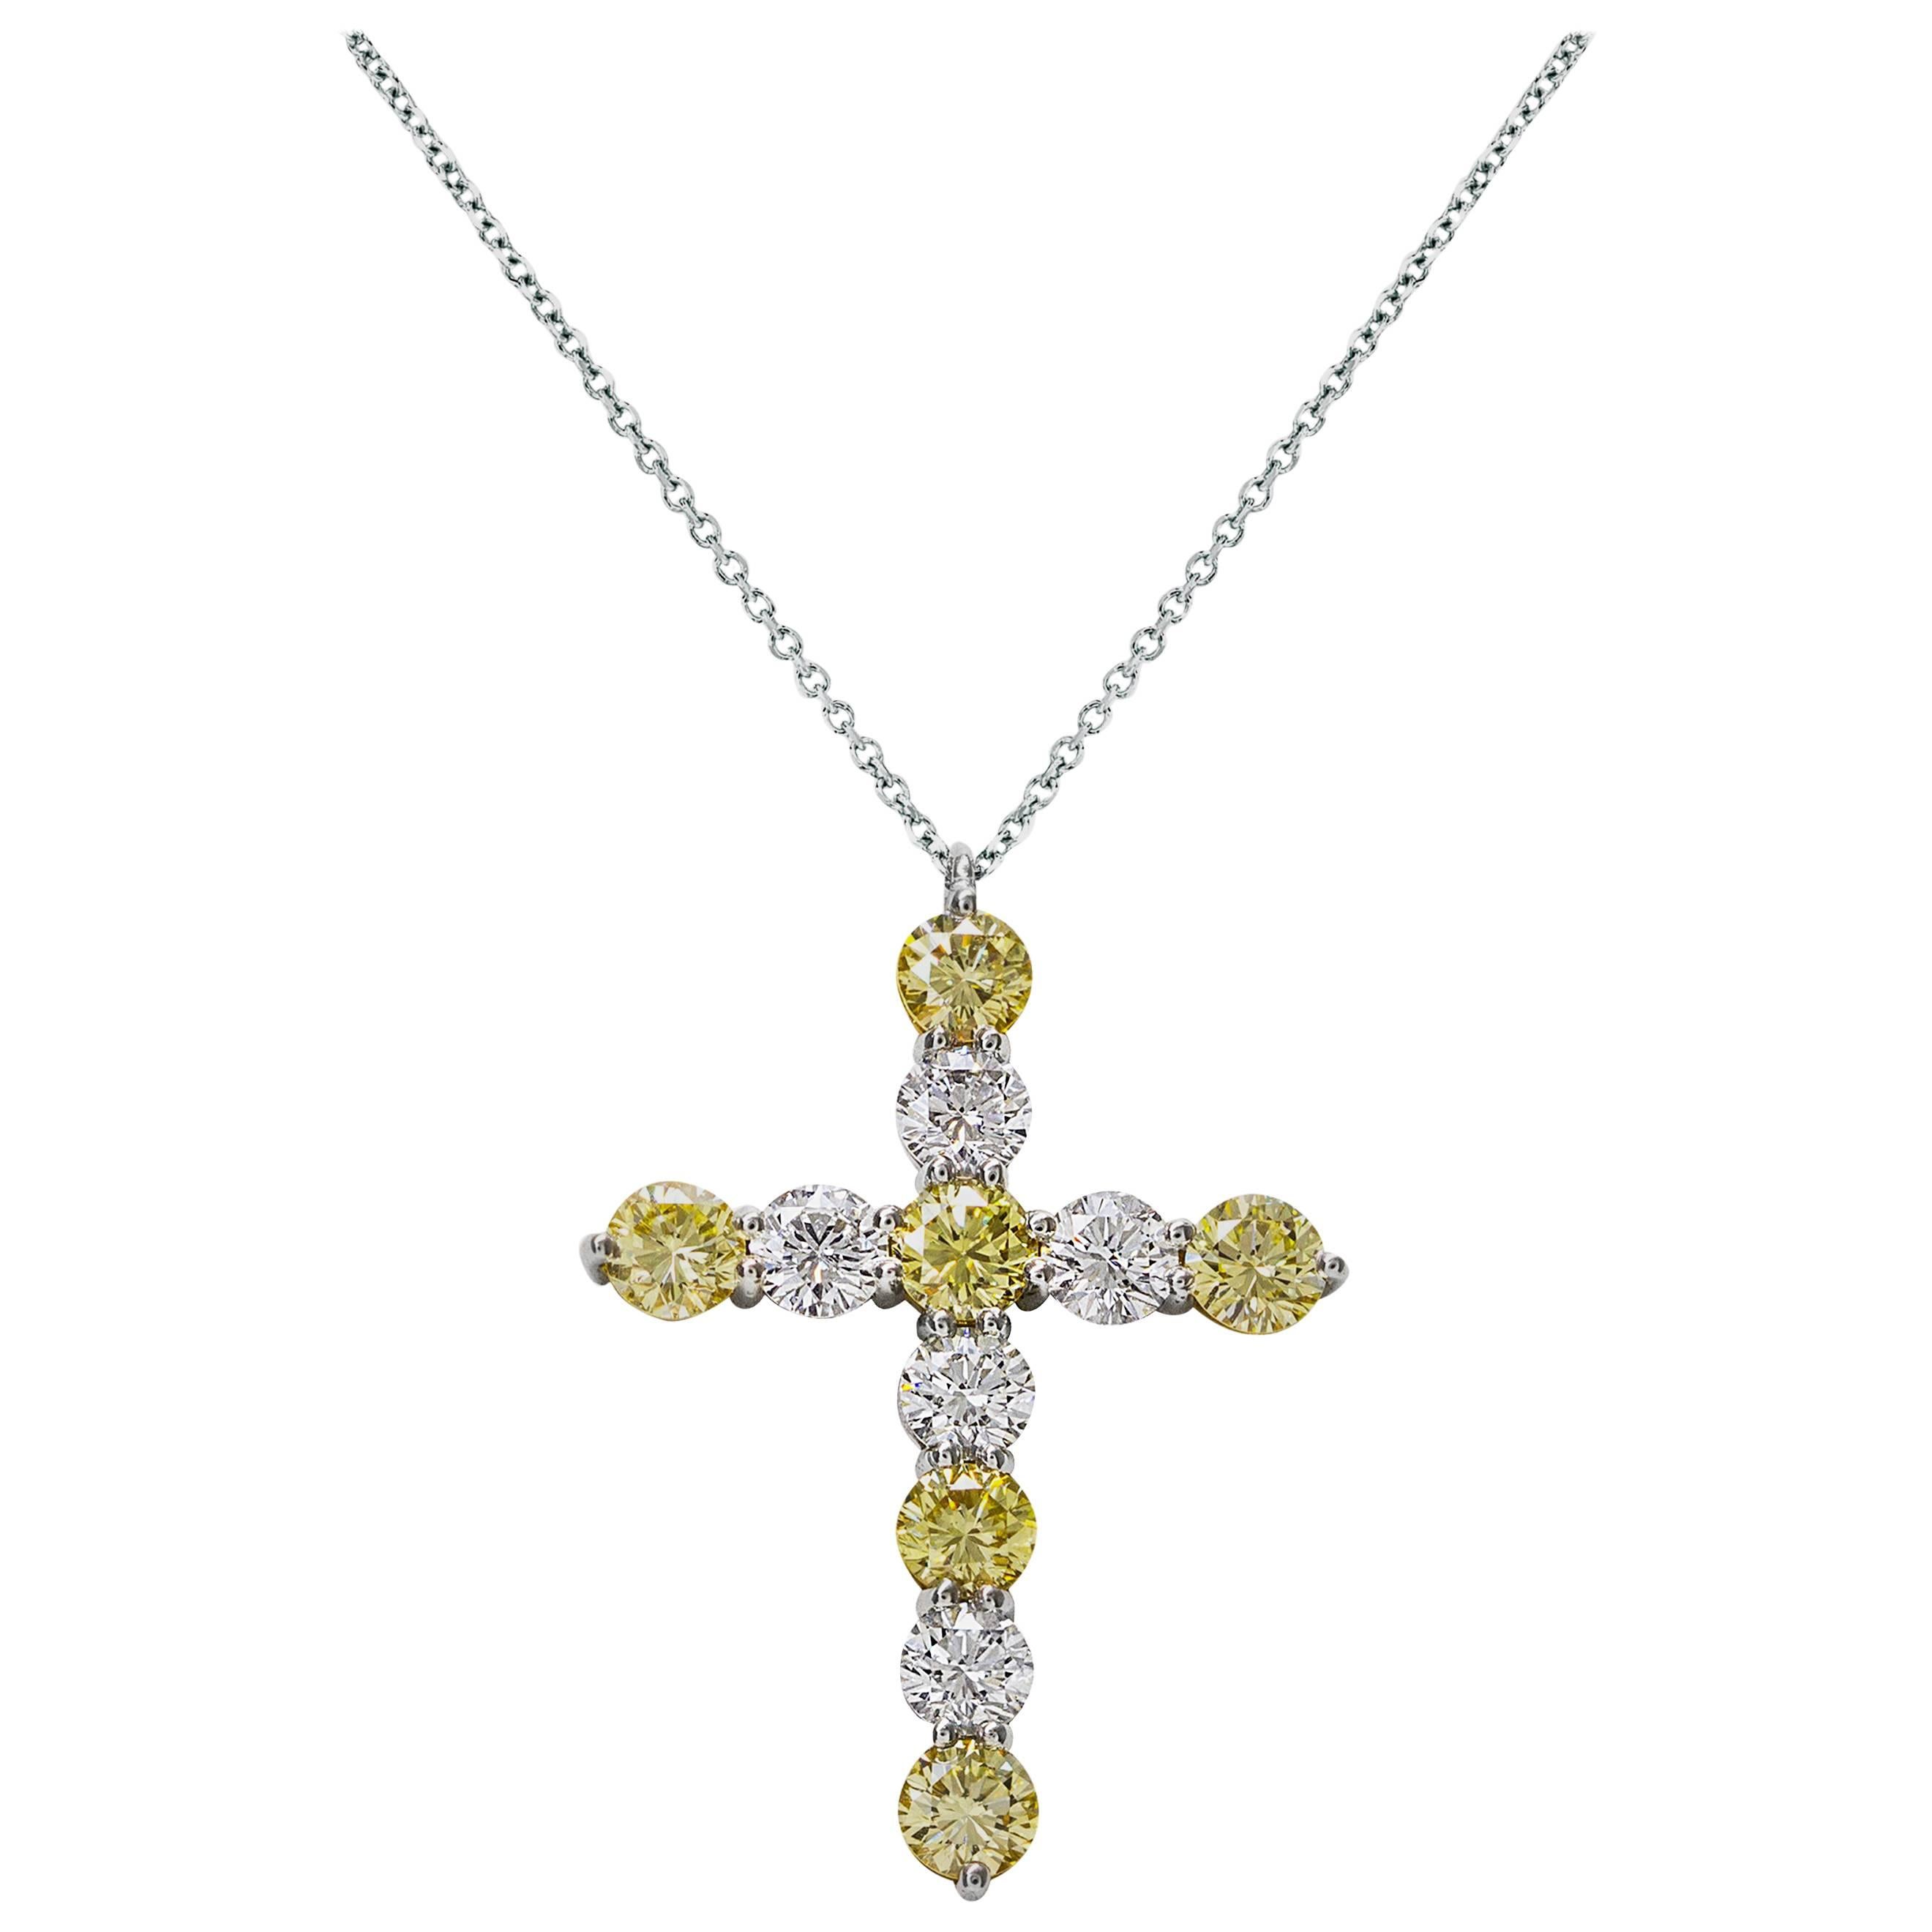 4.32 Carats Total Alternating Yellow and White Diamond Cross Pendant Necklace For Sale